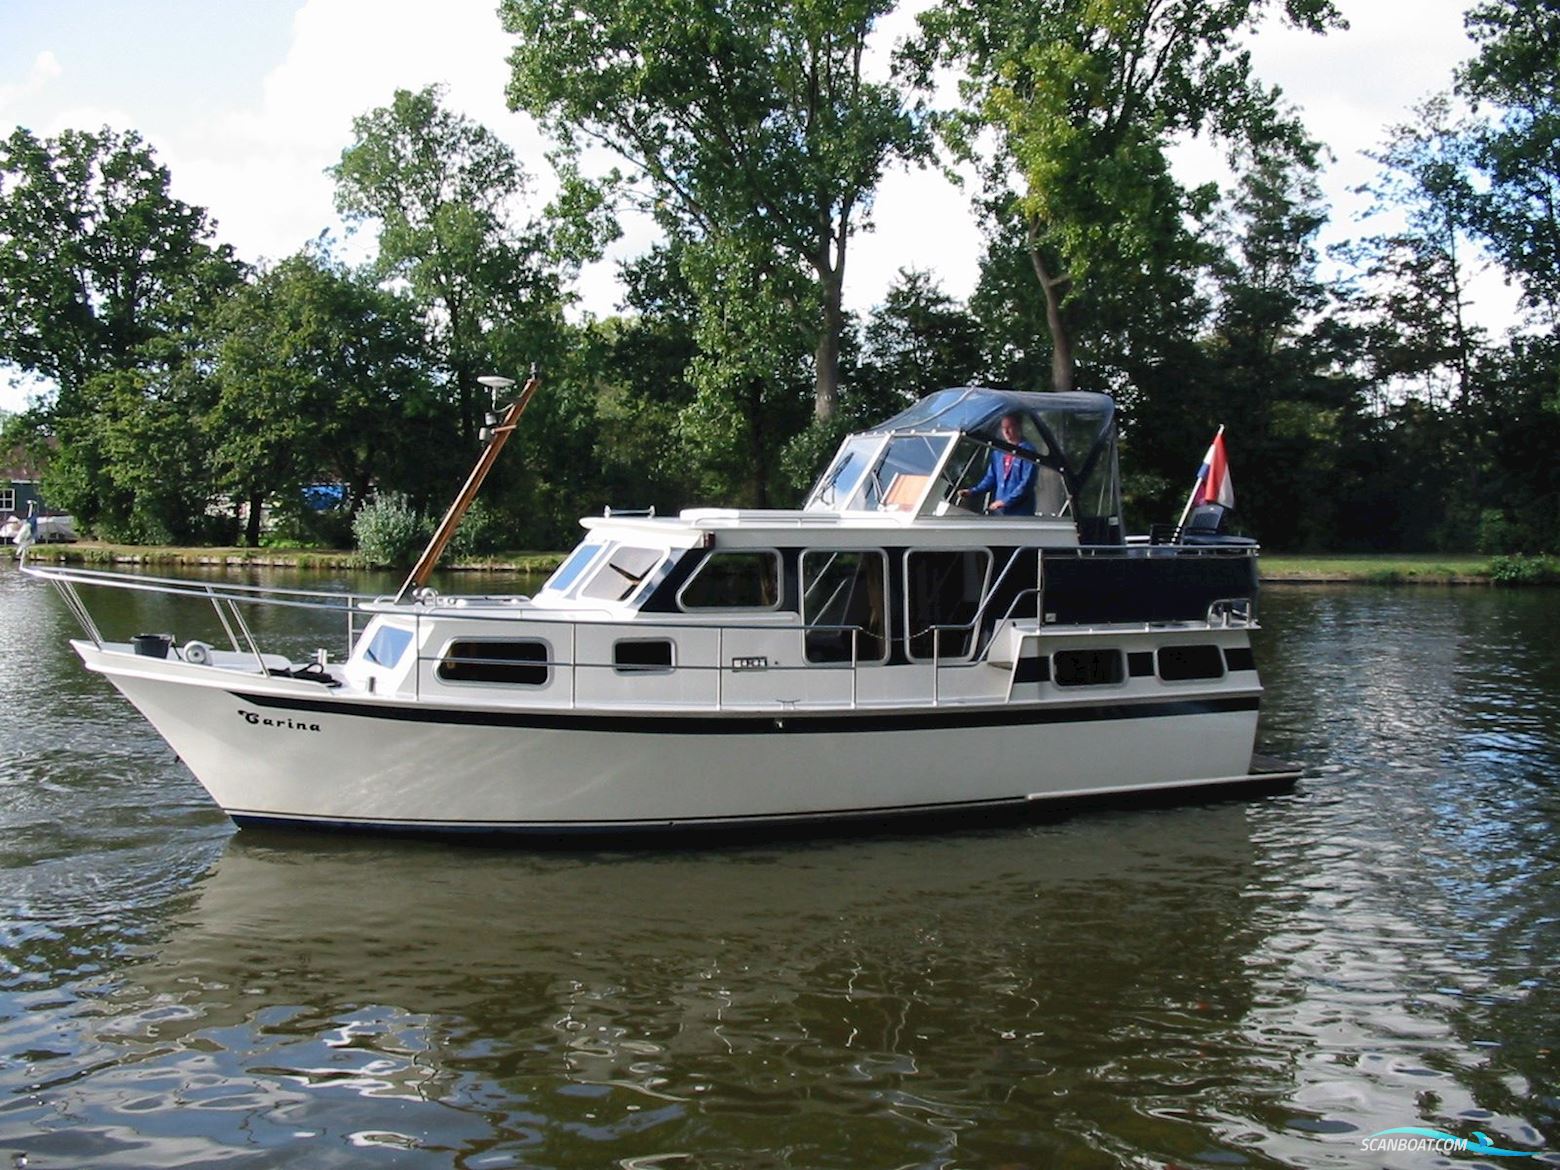 Ankerkruiser 950 AK Motor boat 1996, with Iveco engine, The Netherlands